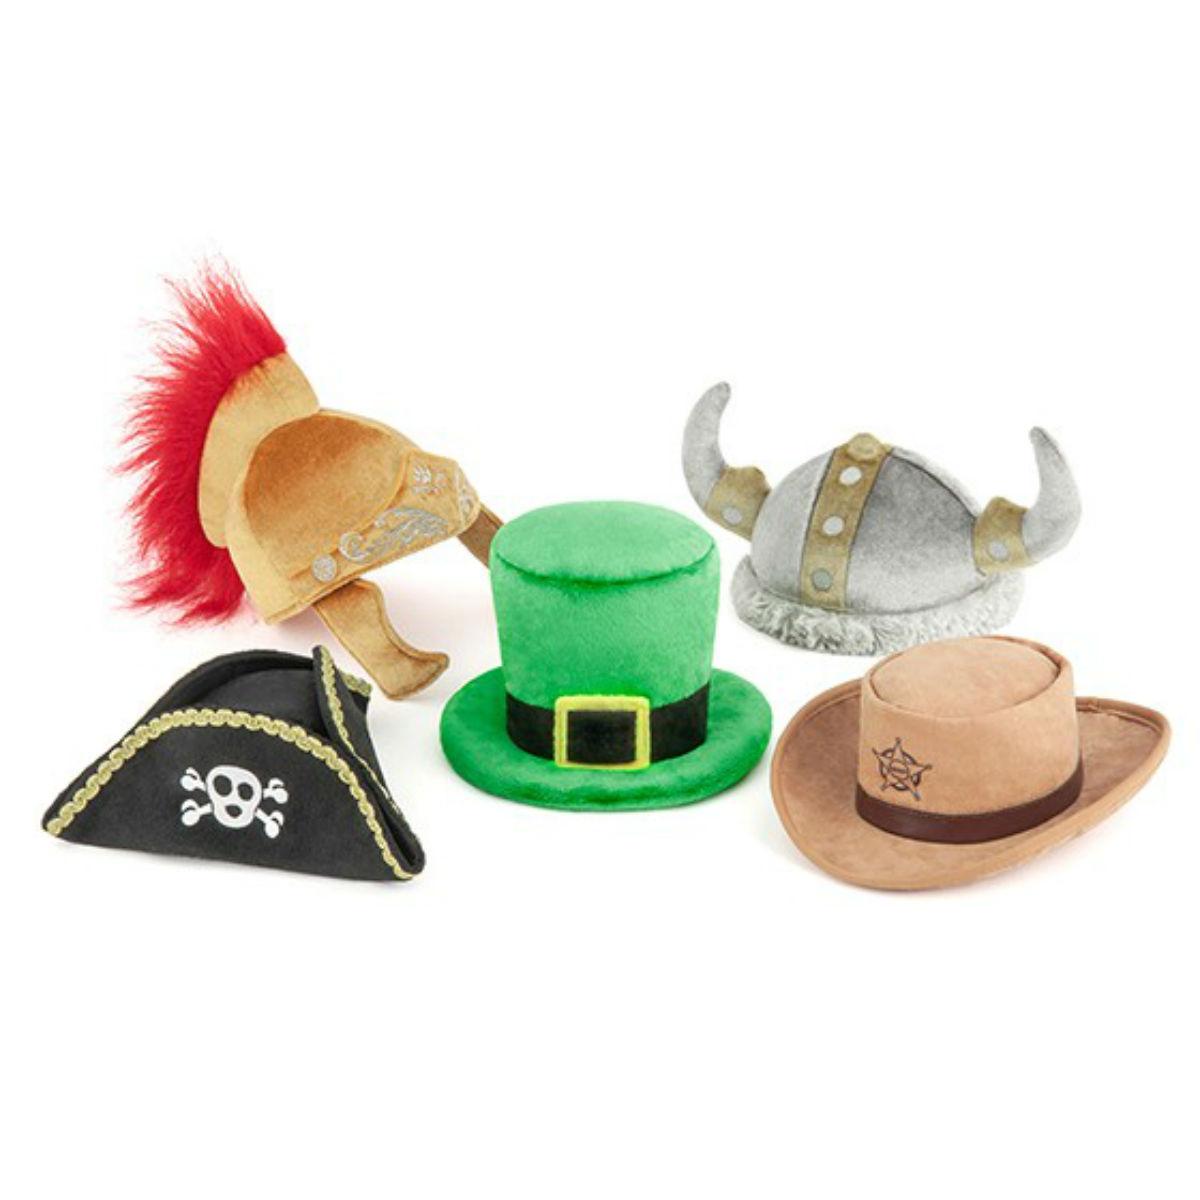 P.L.A.Y. Mutt Hatter Dog Toy Collection - 5 Piece Set